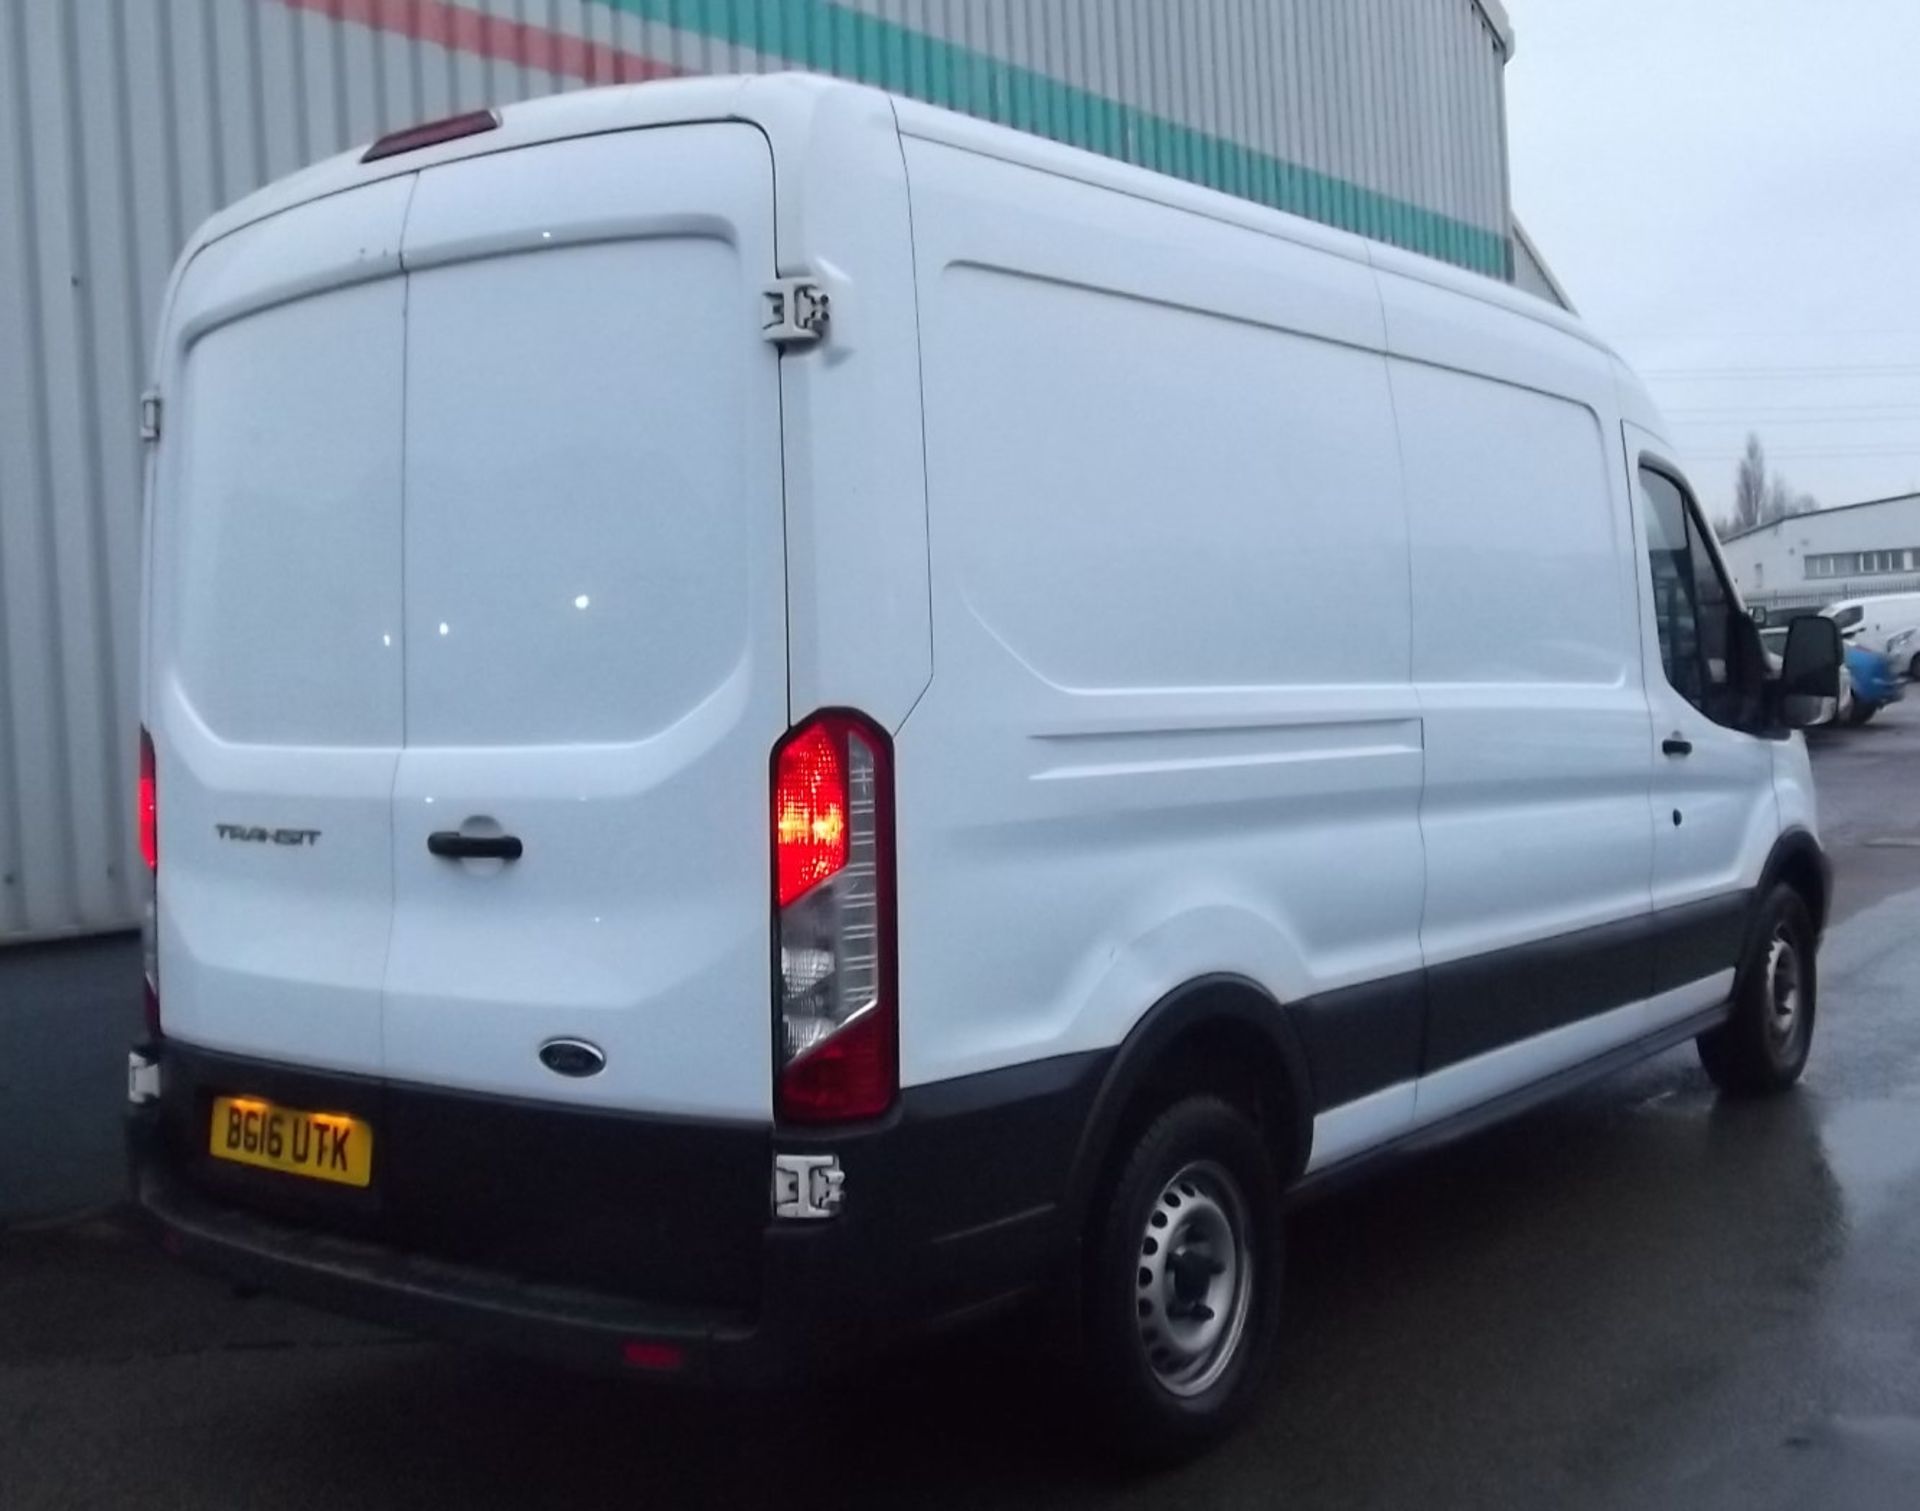 2016 Ford Transit 350 2.2 TDCi 125ps H2 Panel Van - CL505 - Location: Corby, Northamptonshire - Image 4 of 15